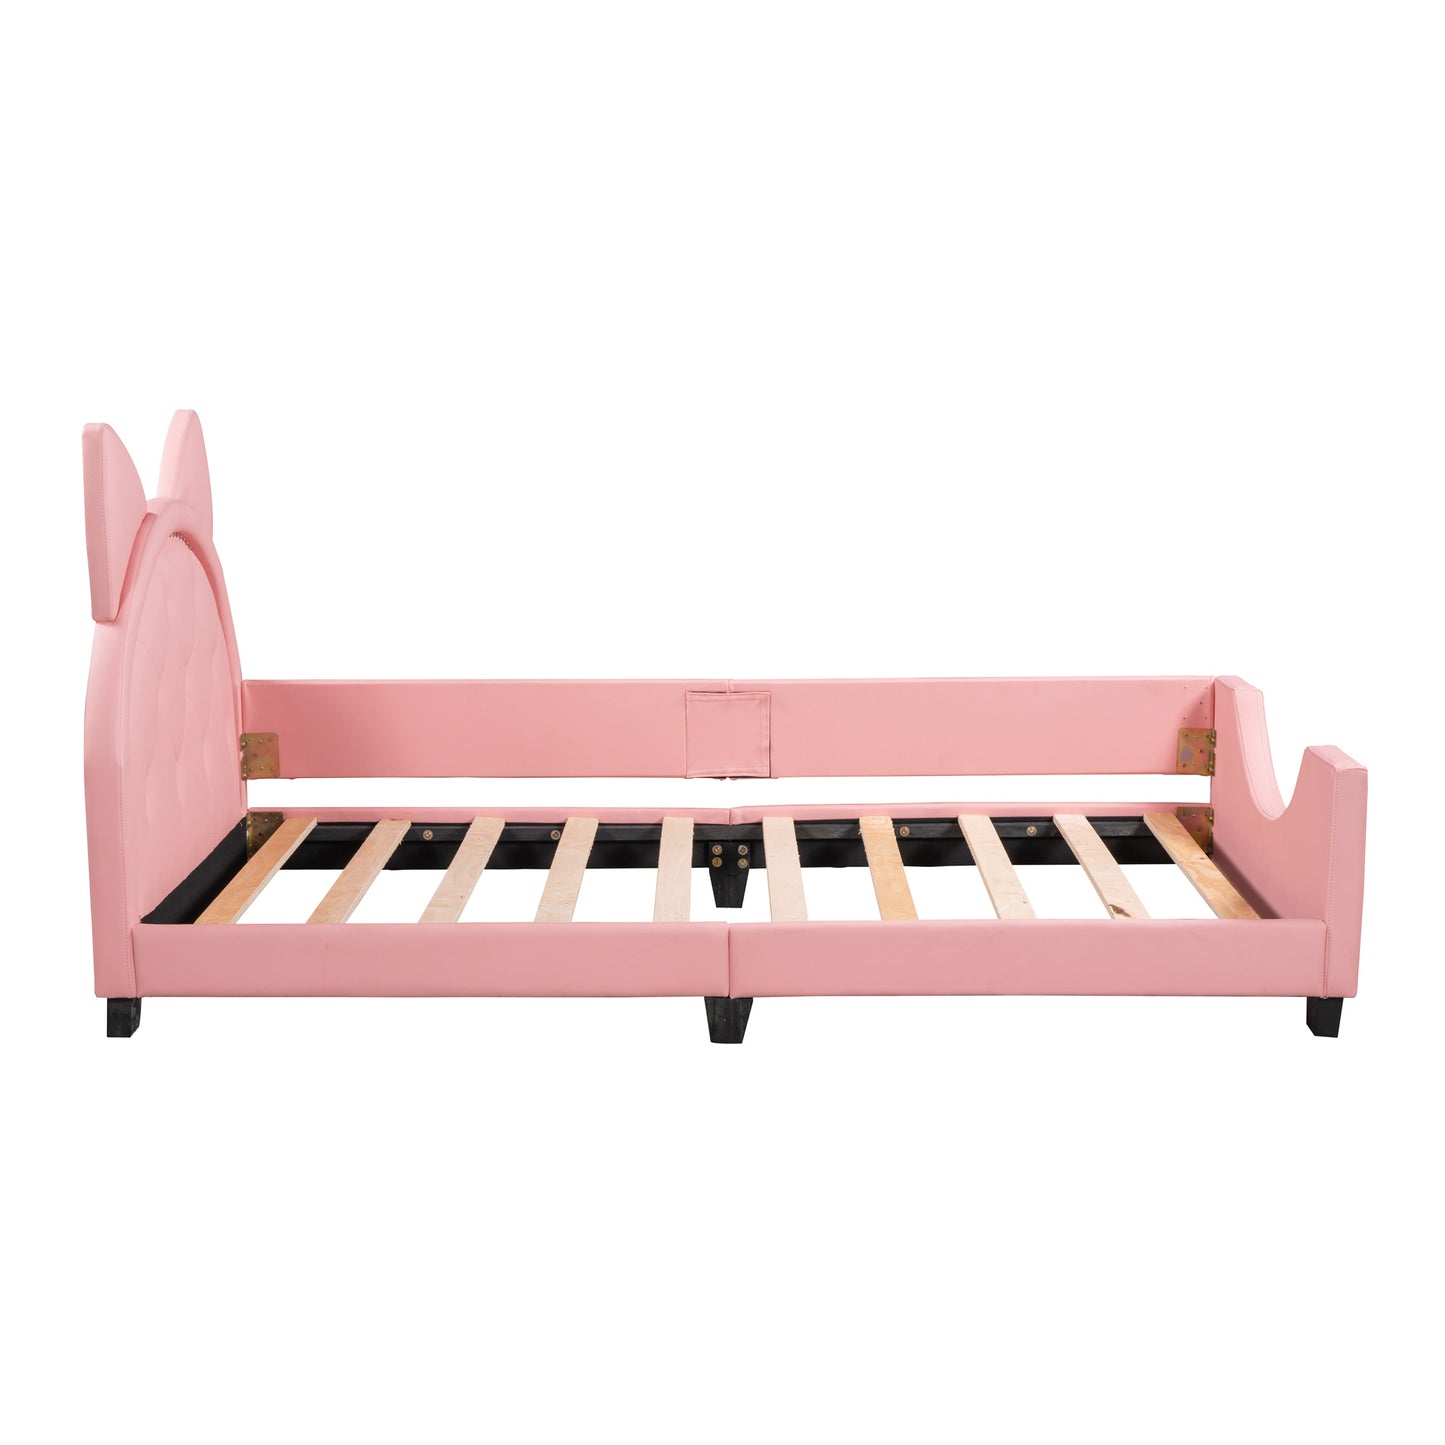 upholstered daybed with carton ears shaped headboard, pink